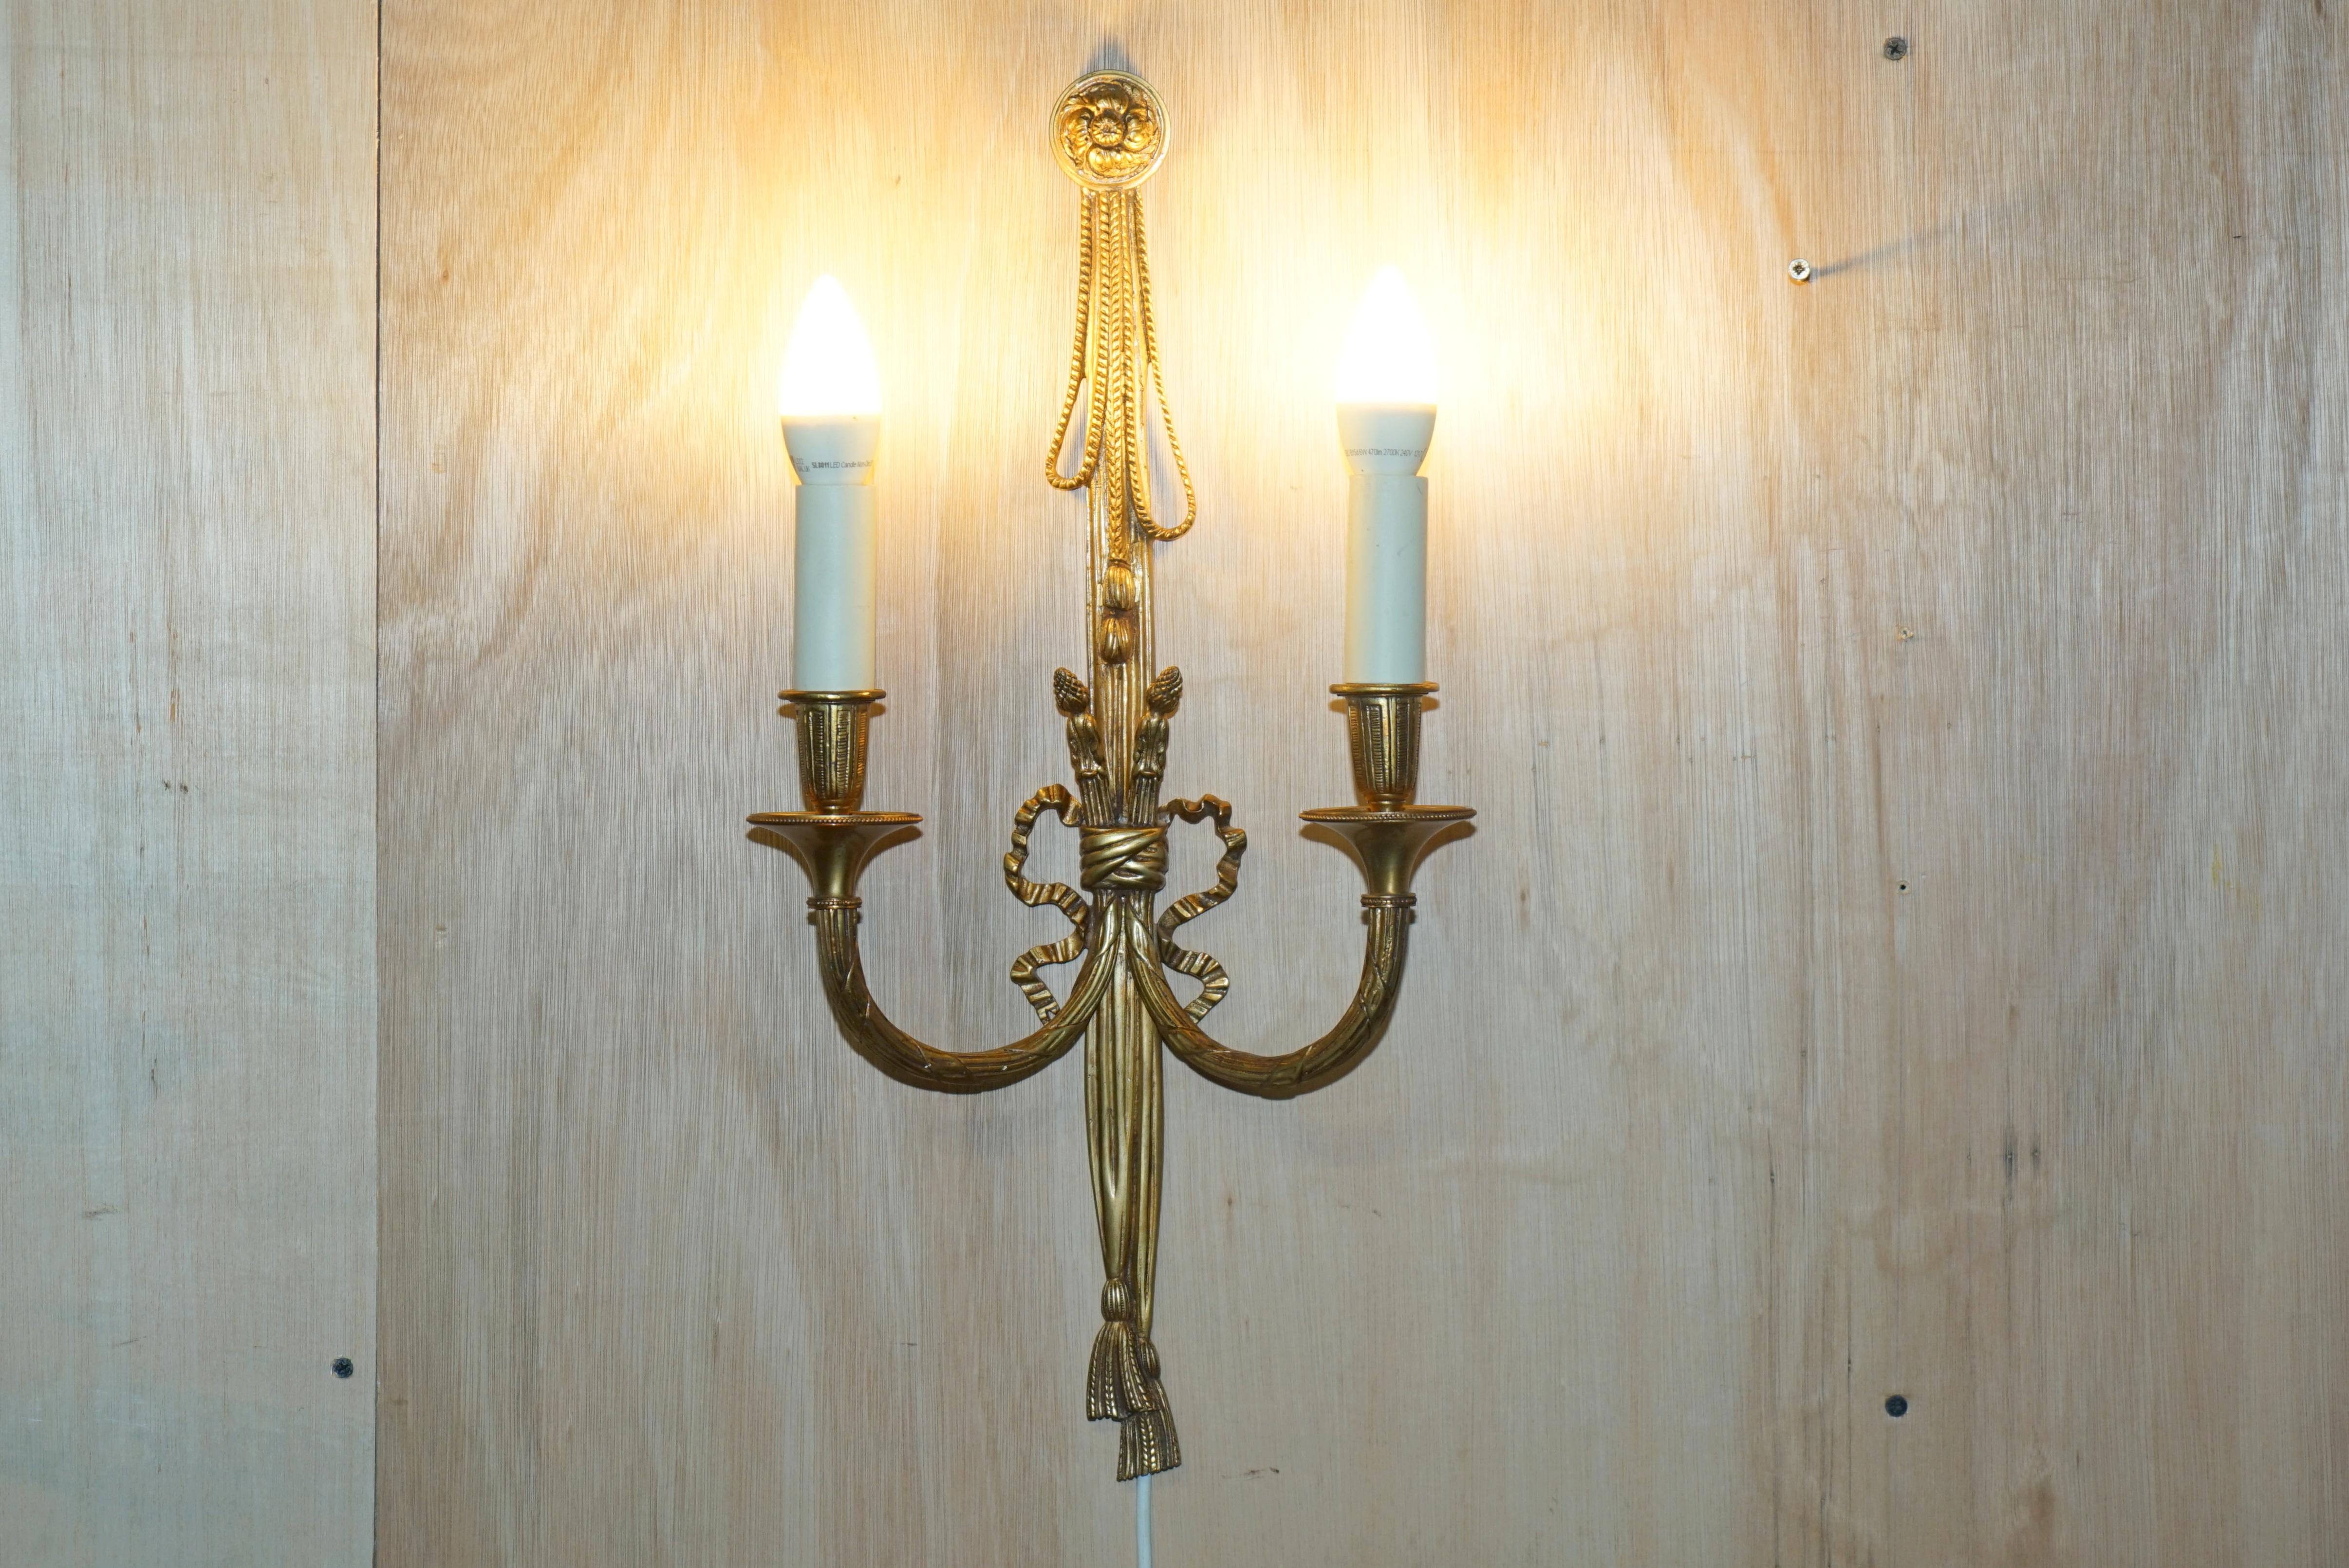 We are delighted to offer for sale this stunning suite of four large antique circa 1920-1940 Gilt Bronze wall sconces which are part of a larger set 

These sconces are part of a set as mentioned, I have these four larger example, four smaller